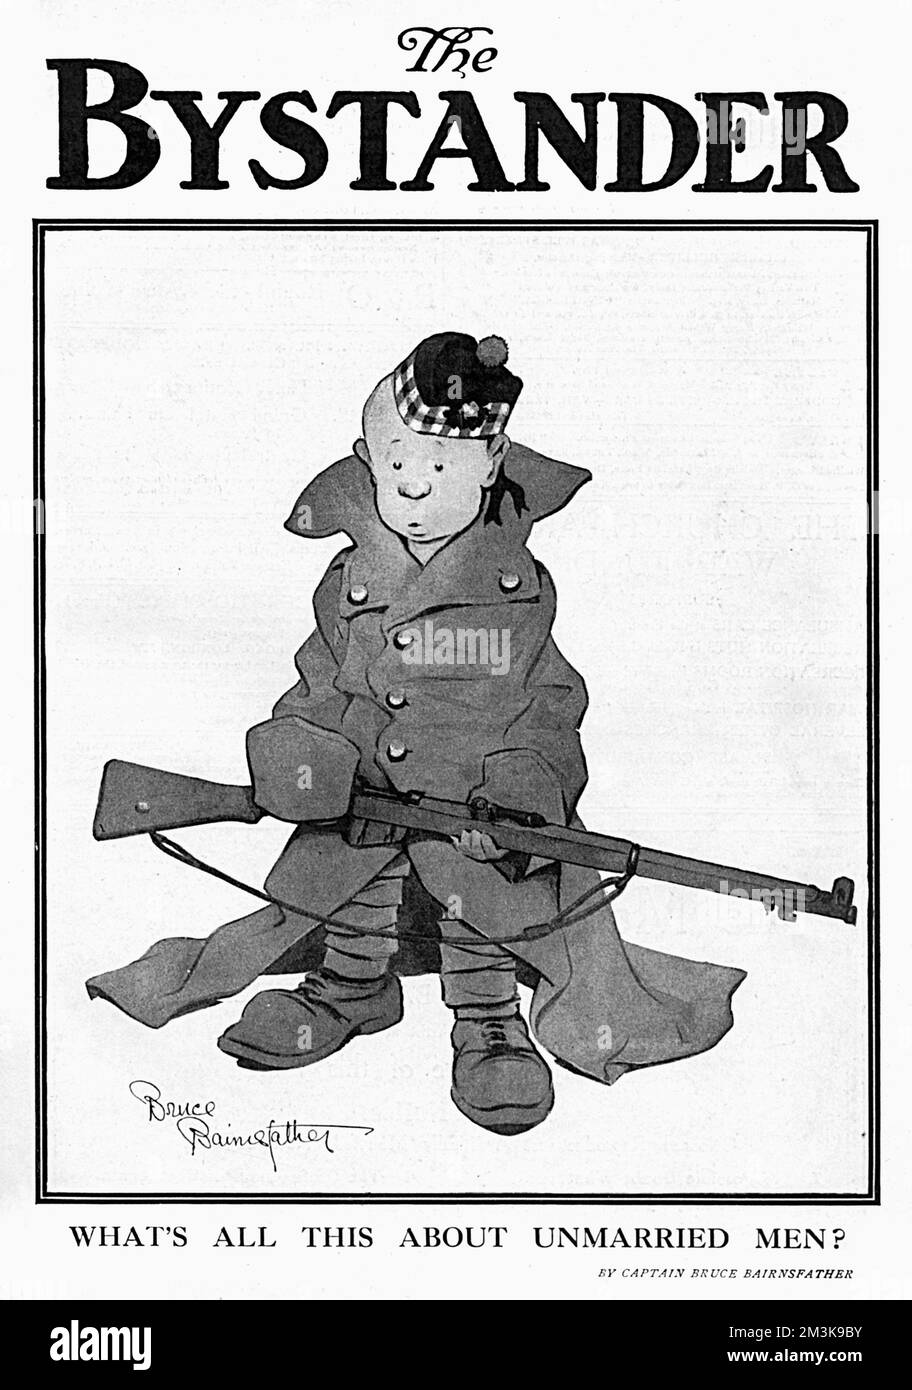 Humorous illustration depicting an extremely youthful soldier, a comment on the number of underage recruits joining up during World War I. Underage enlisters were fairly commonplace and if bigger than average, most recruiting officers would turn a blind eye.  1916 Stock Photo